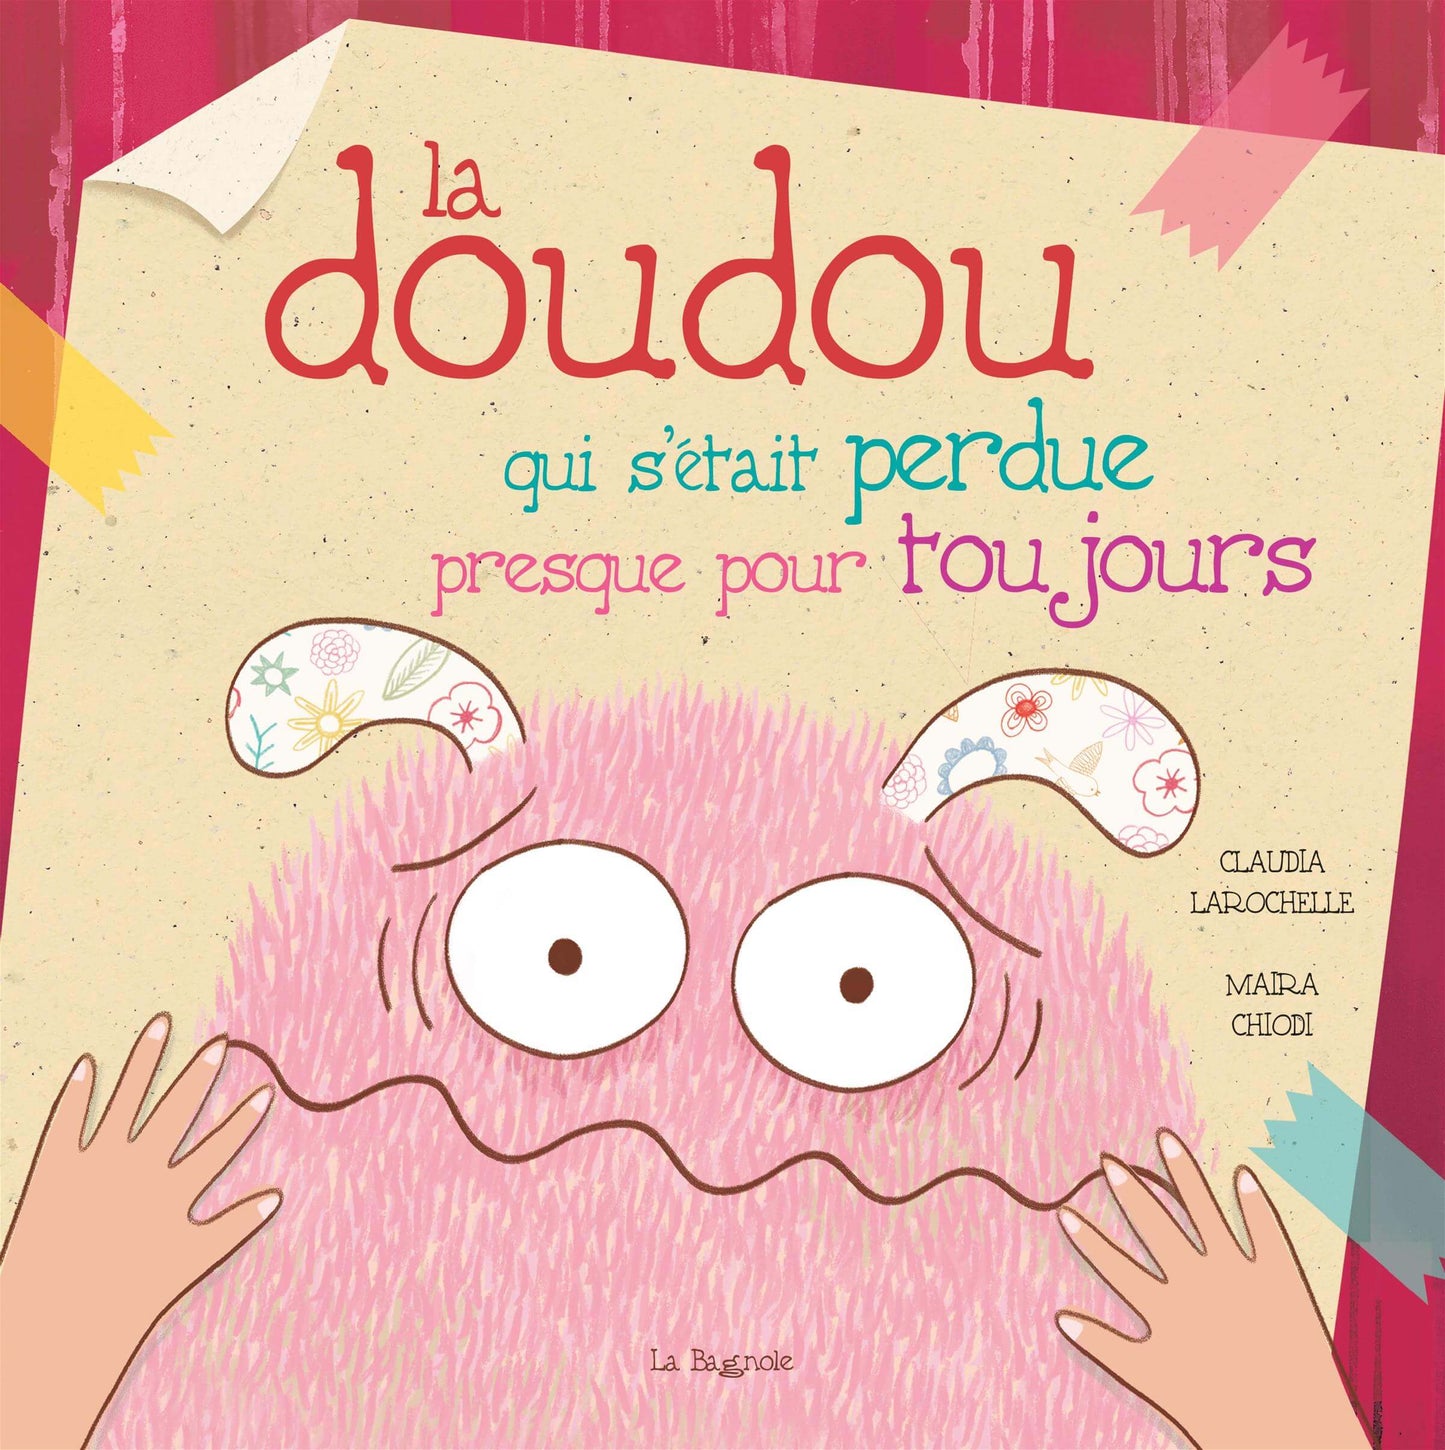 Doudou who had lost his way almost forever